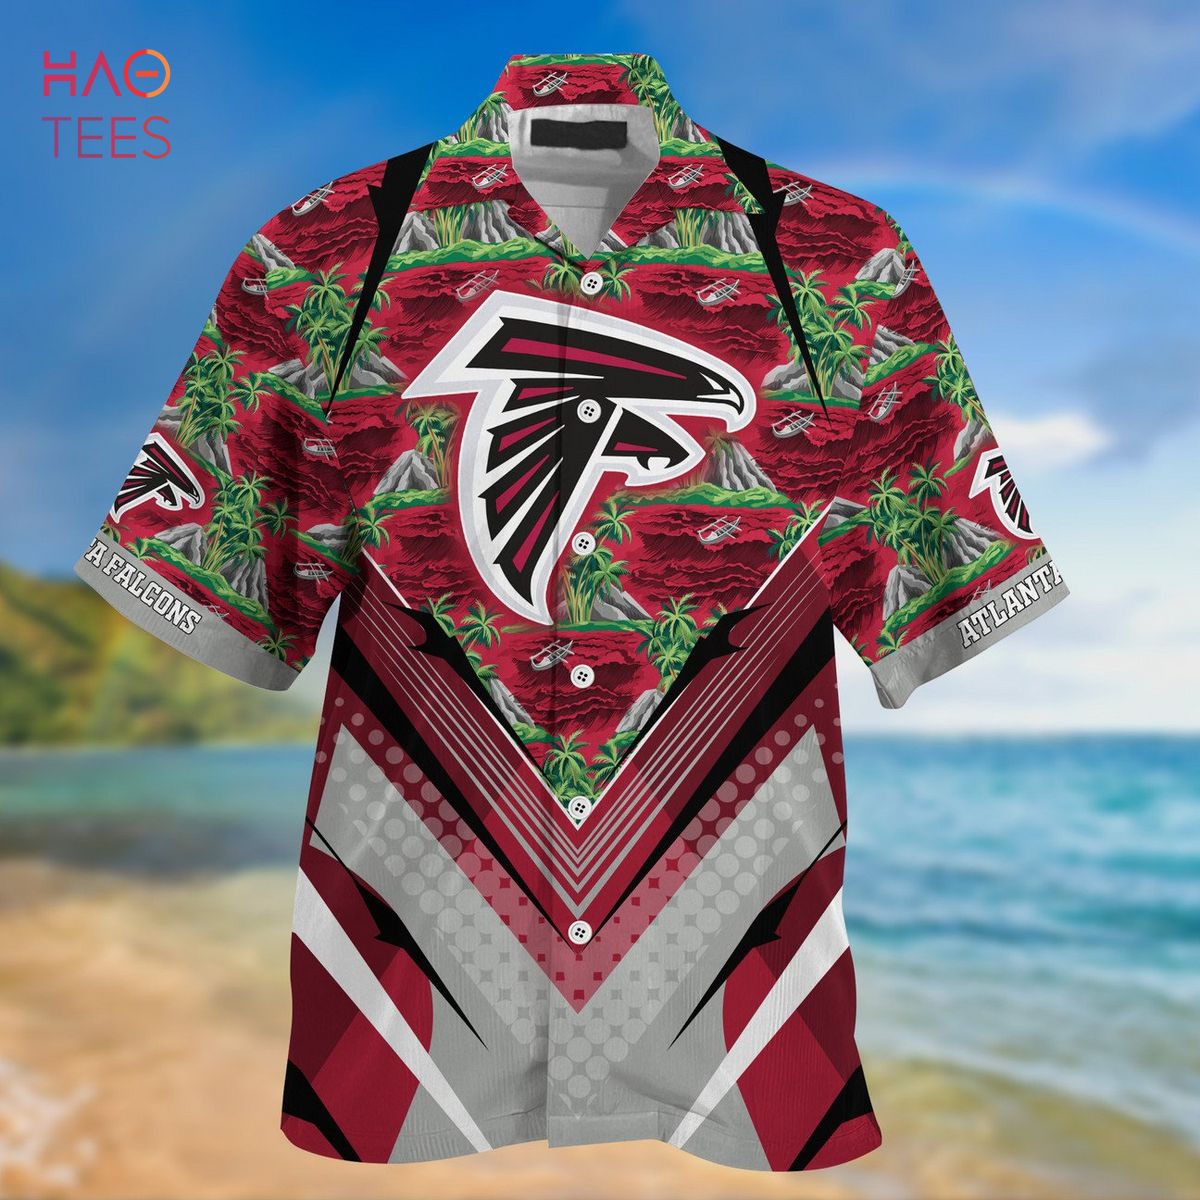 falcons limited jersey